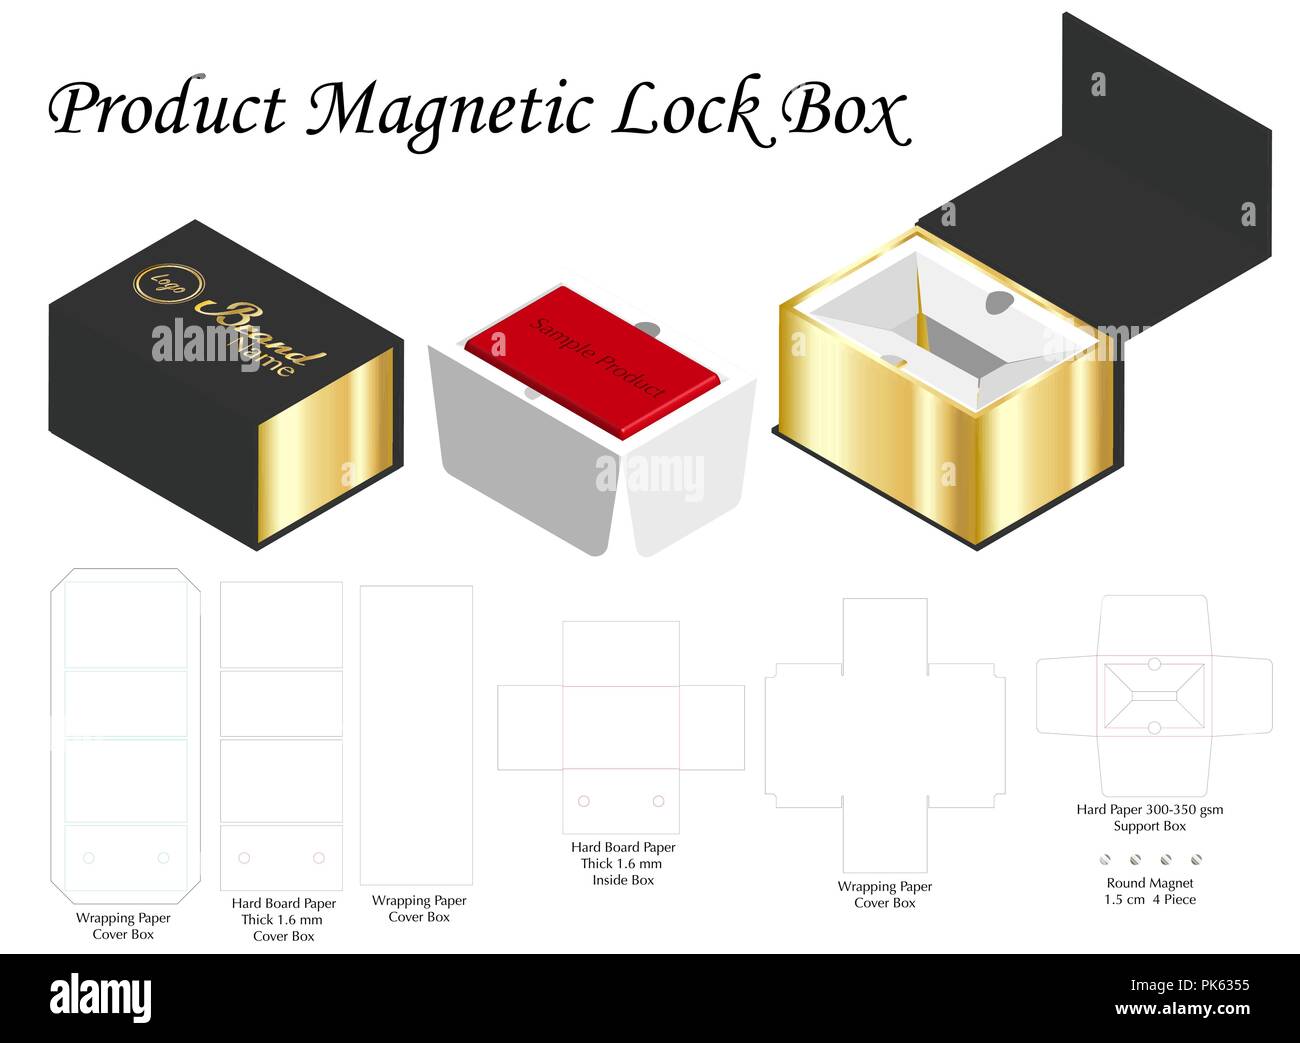 1,999 Magnet Box Packaging Images, Stock Photos, 3D objects